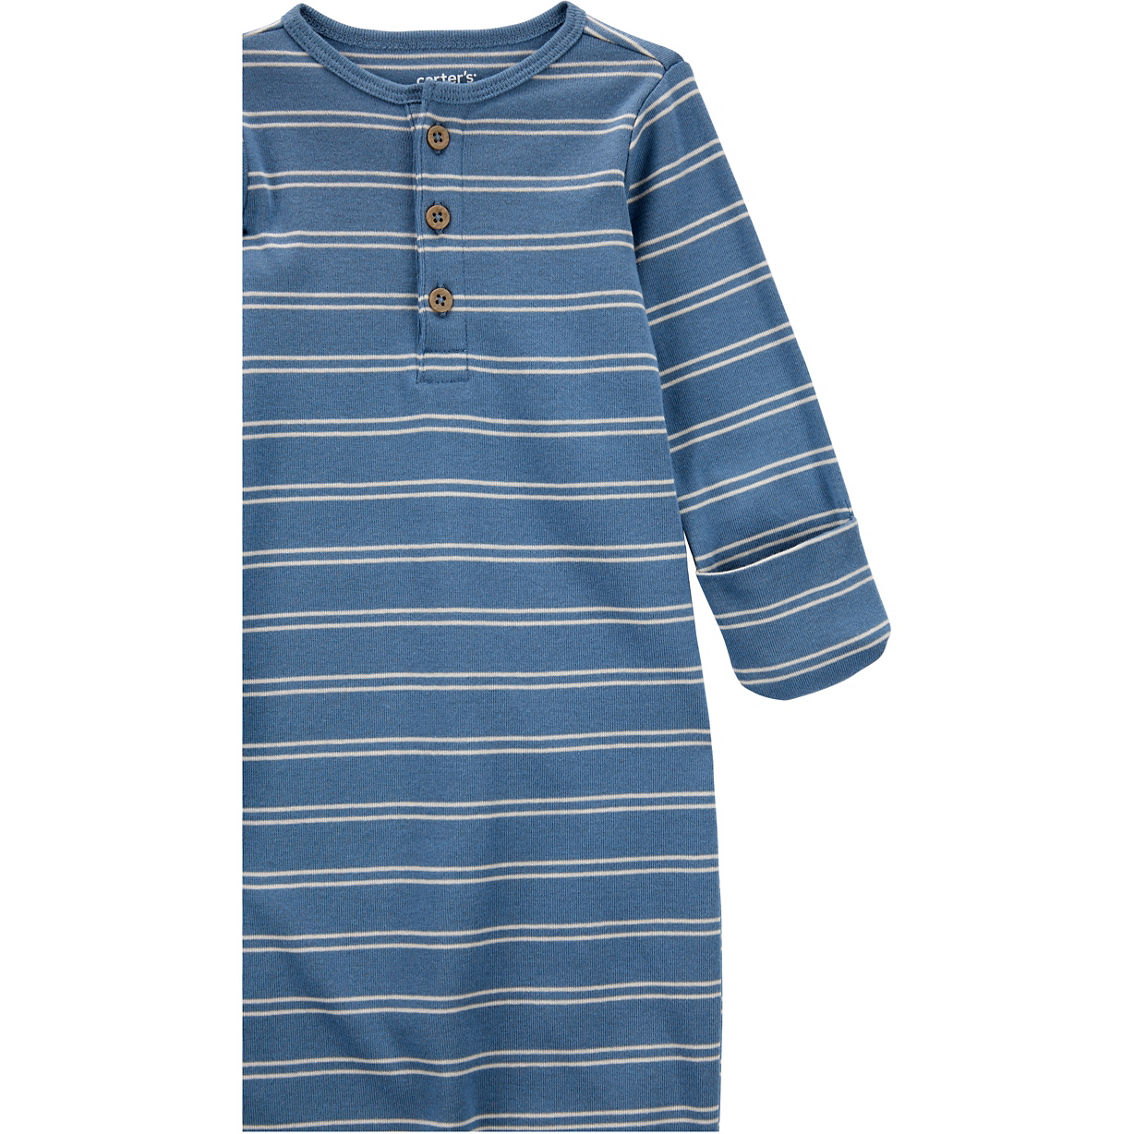 Carter's Infant Boys Blue Sleeper Gowns 2 pk. - Image 2 of 4